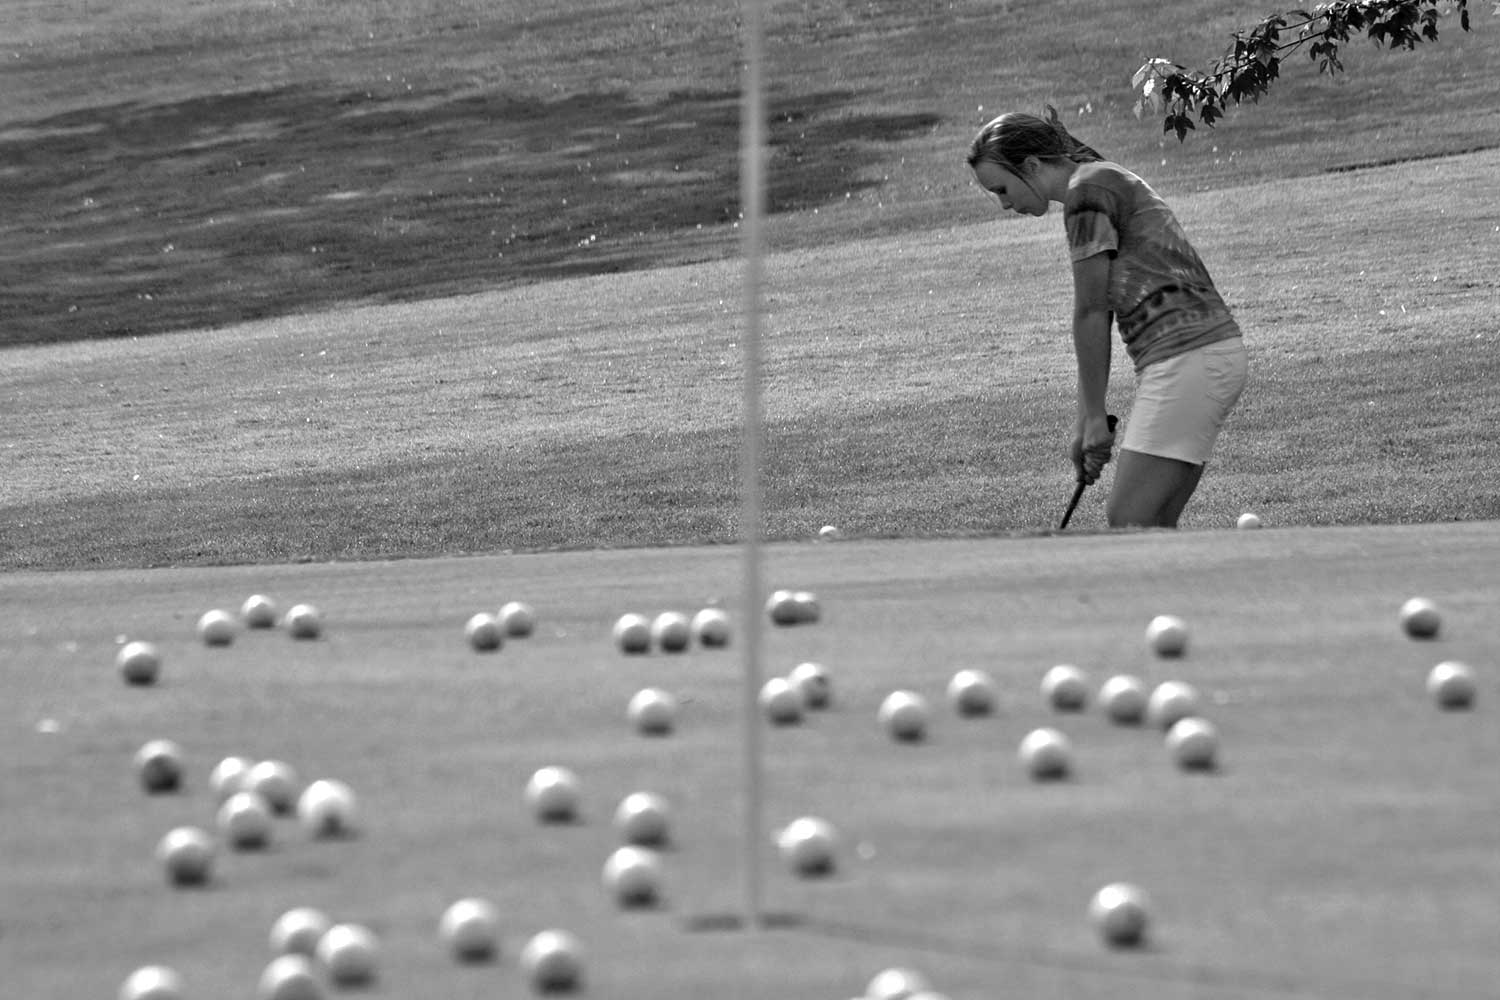 Lindsay Taylor attempts a chip shot at the green. photo by Andy Hayes - 2010